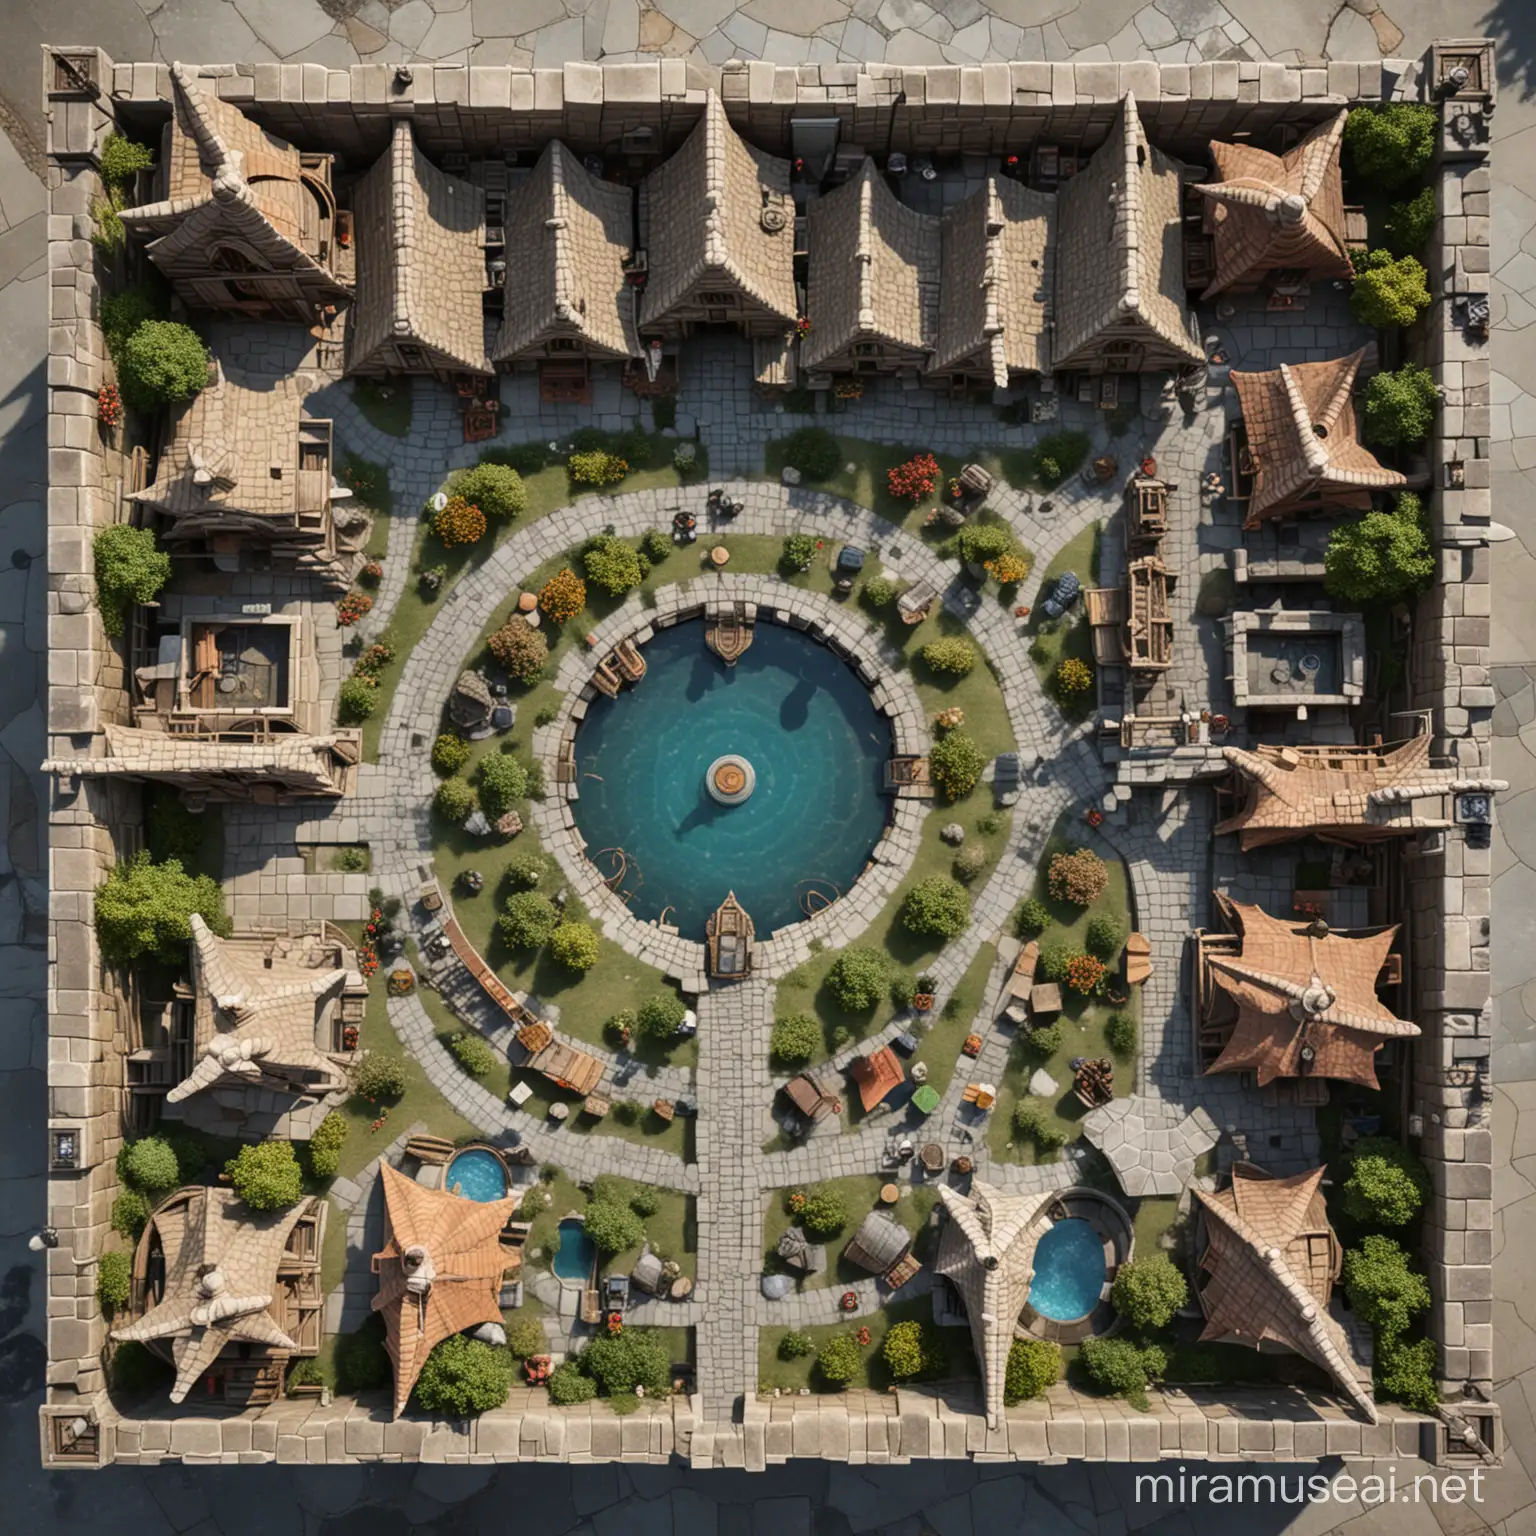 Dungeons and Dragons Village Aerial View of Serene Fountain Amidst Rustic Dwellings